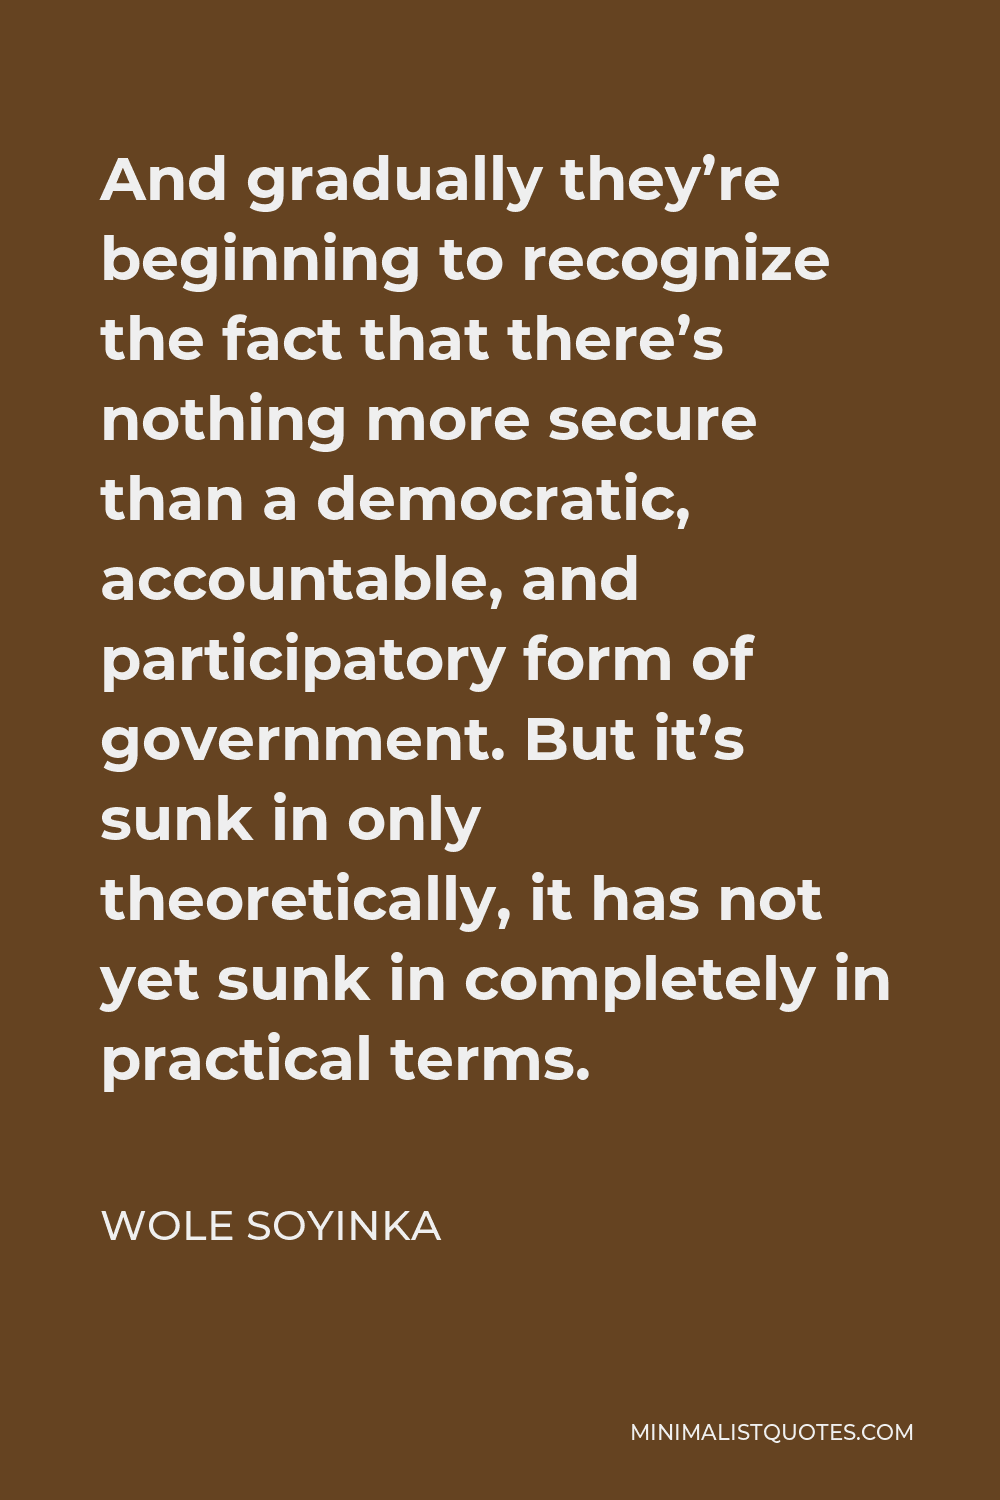 Wole Soyinka Quote - And gradually they’re beginning to recognize the fact that there’s nothing more secure than a democratic, accountable, and participatory form of government. But it’s sunk in only theoretically, it has not yet sunk in completely in practical terms.